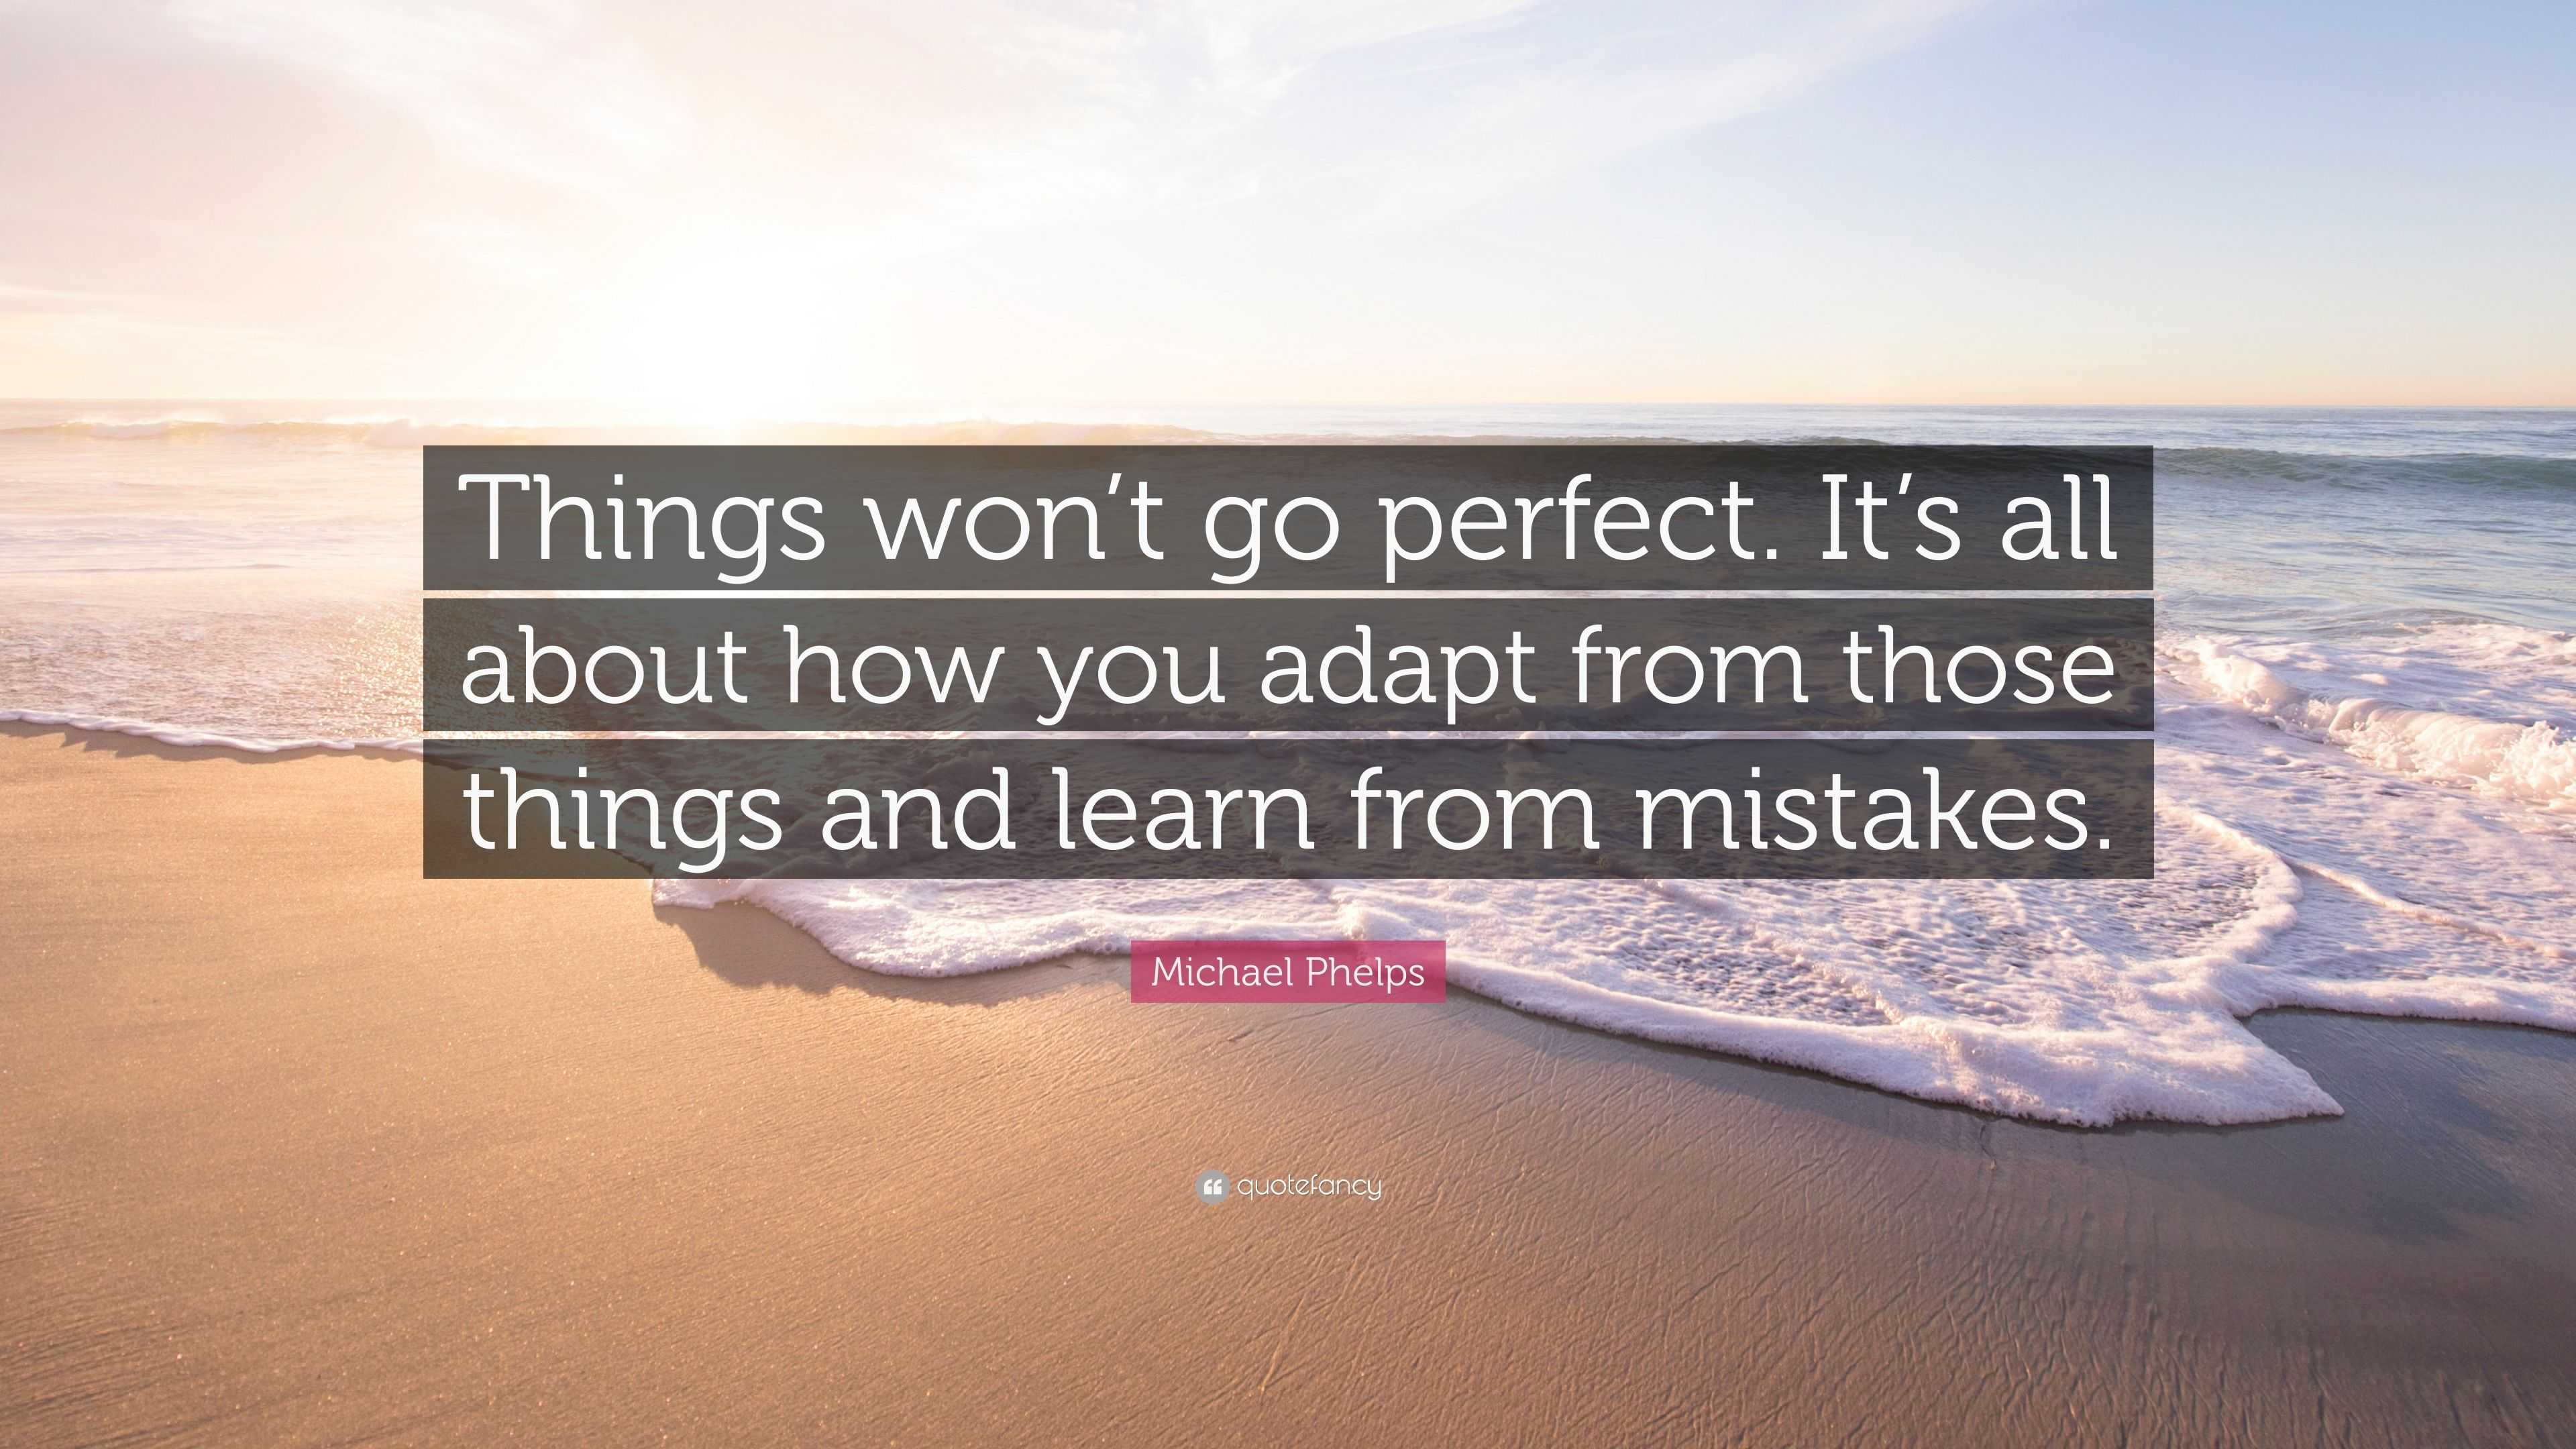 Michael Phelps Quote: “Things won't go perfect. It's all about how you adapt  from those